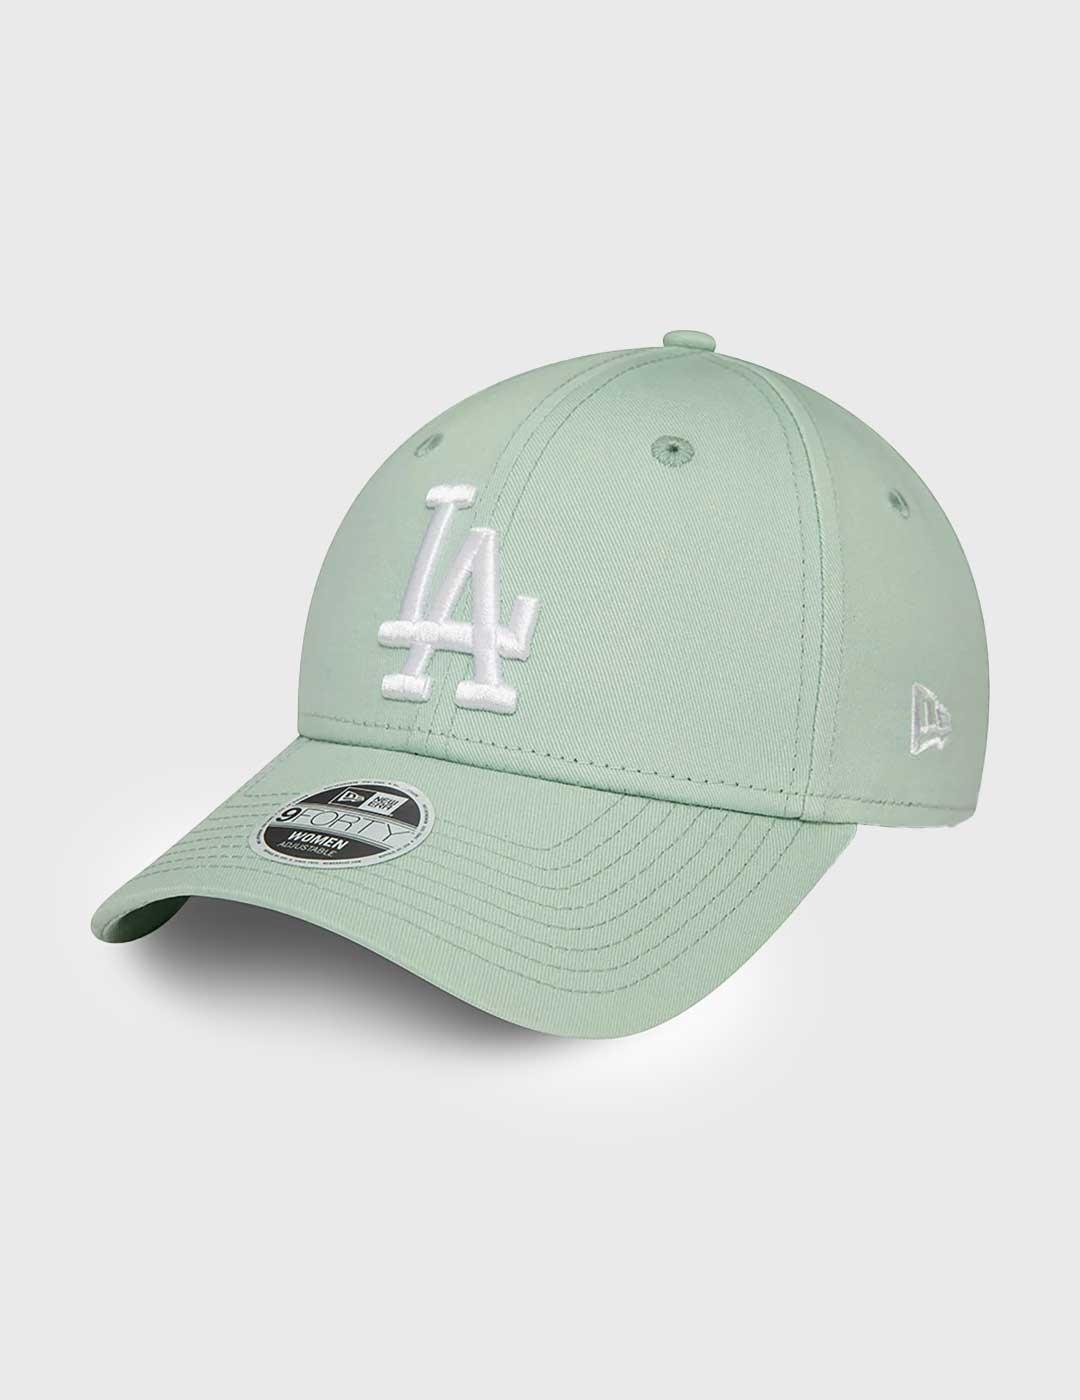 New Era Womans League 9Forty Gorra verde para mujer